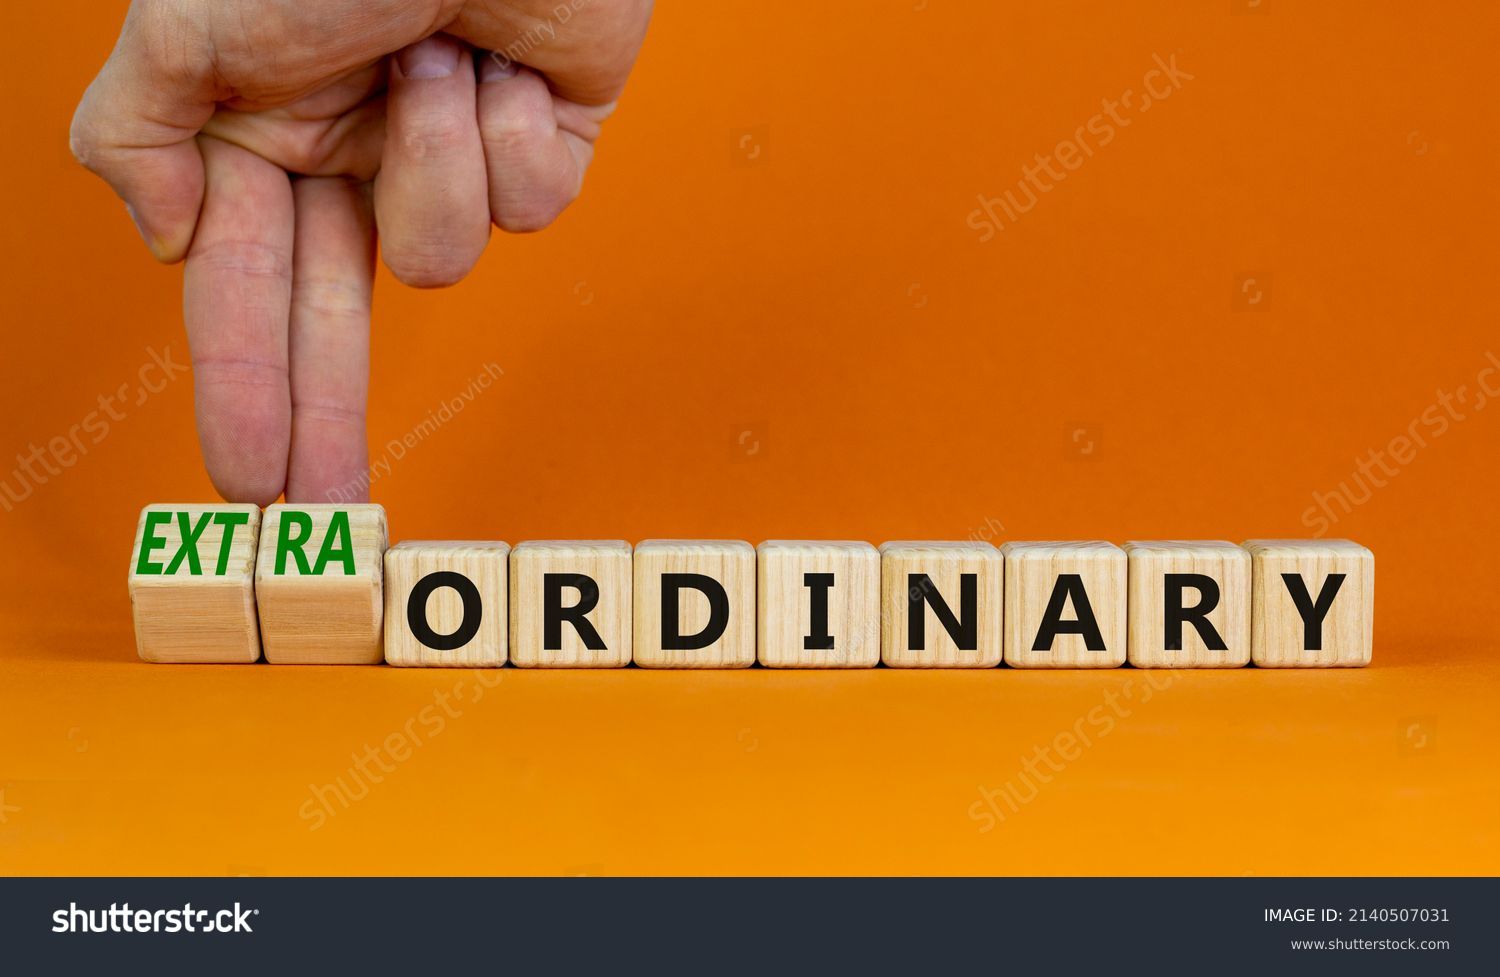 Ordinary or extraordinary symbol. Businessman turnes wooden cubes and changes words 'Ordinary extraordinary'. Beautiful orange background. Business, ordinary or extraordinary concept. Copy space. #2140507031